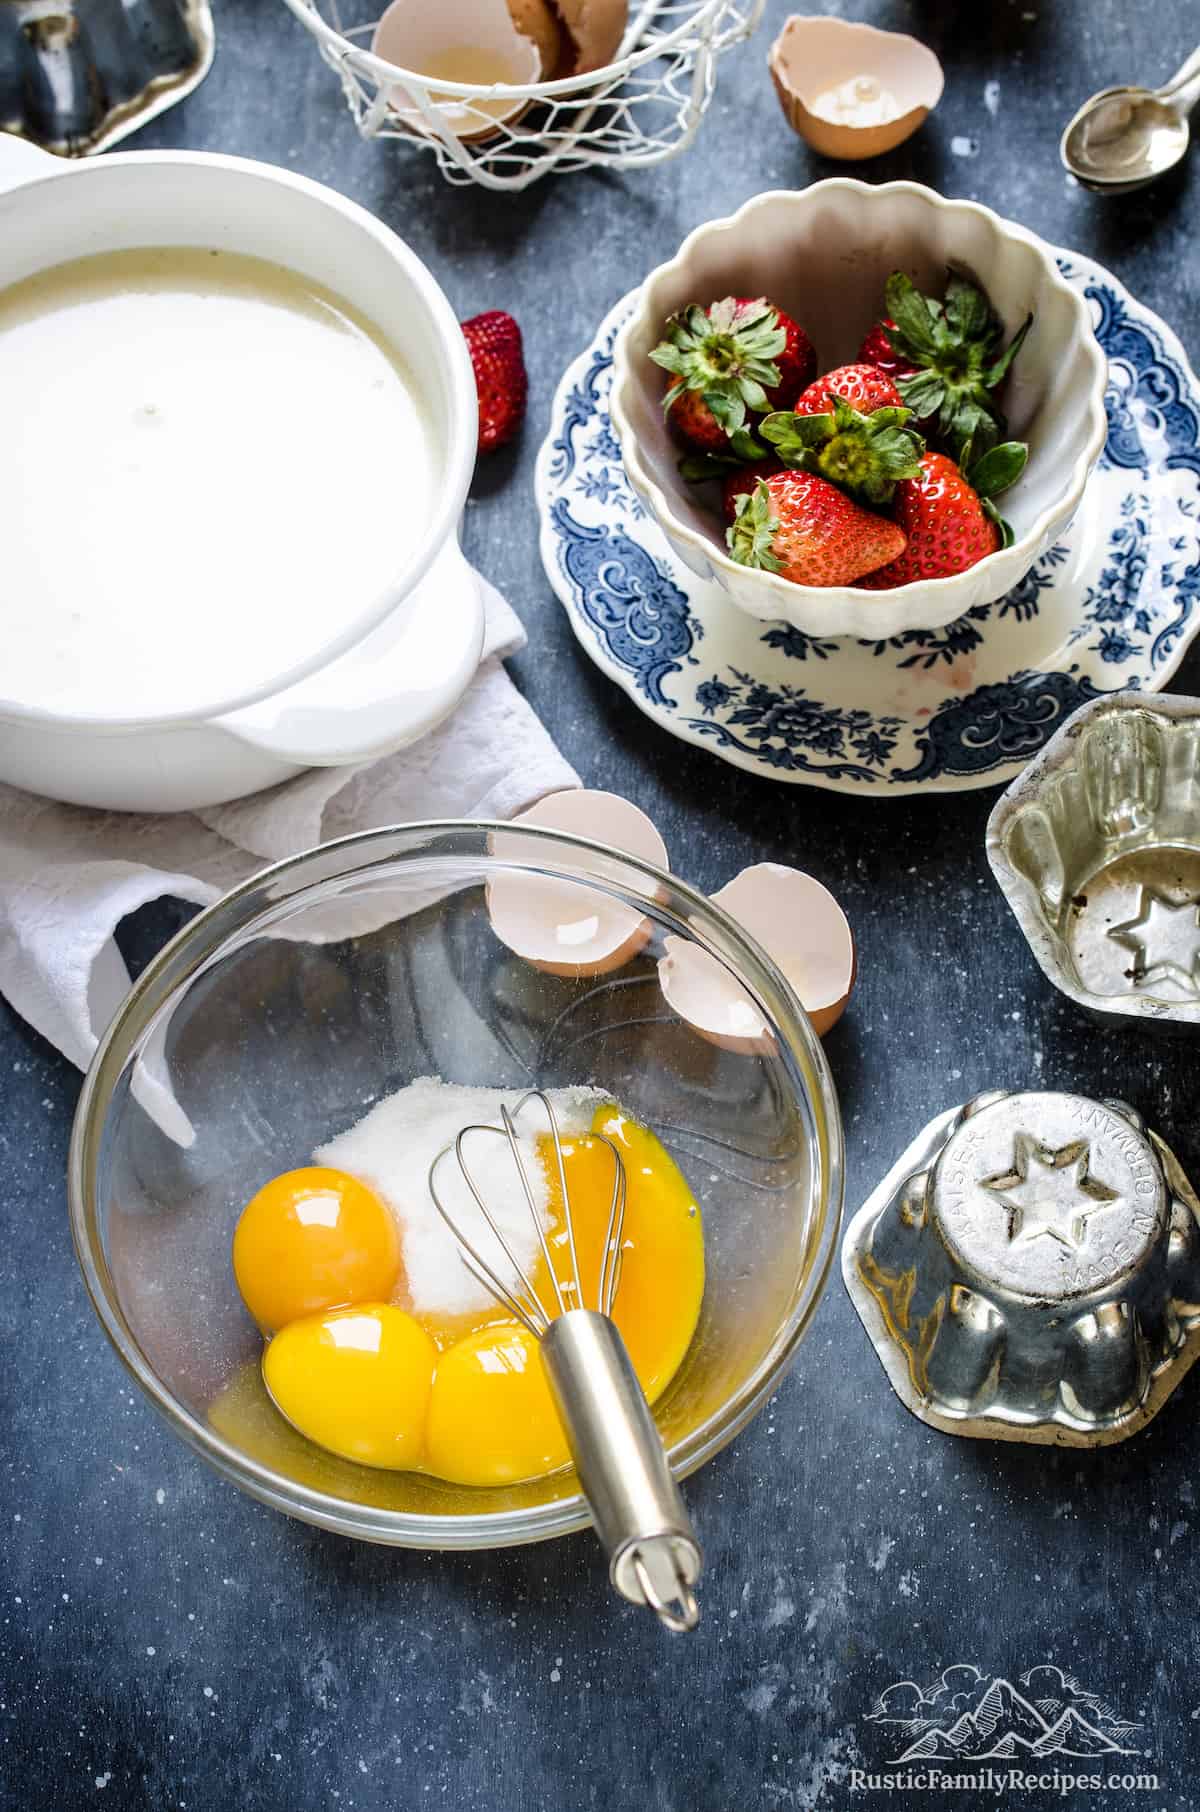 Egg yolks are whisked together with sugar in a glass mixing bowl, next to the pudding cream mixture and a bowl of strawberries.